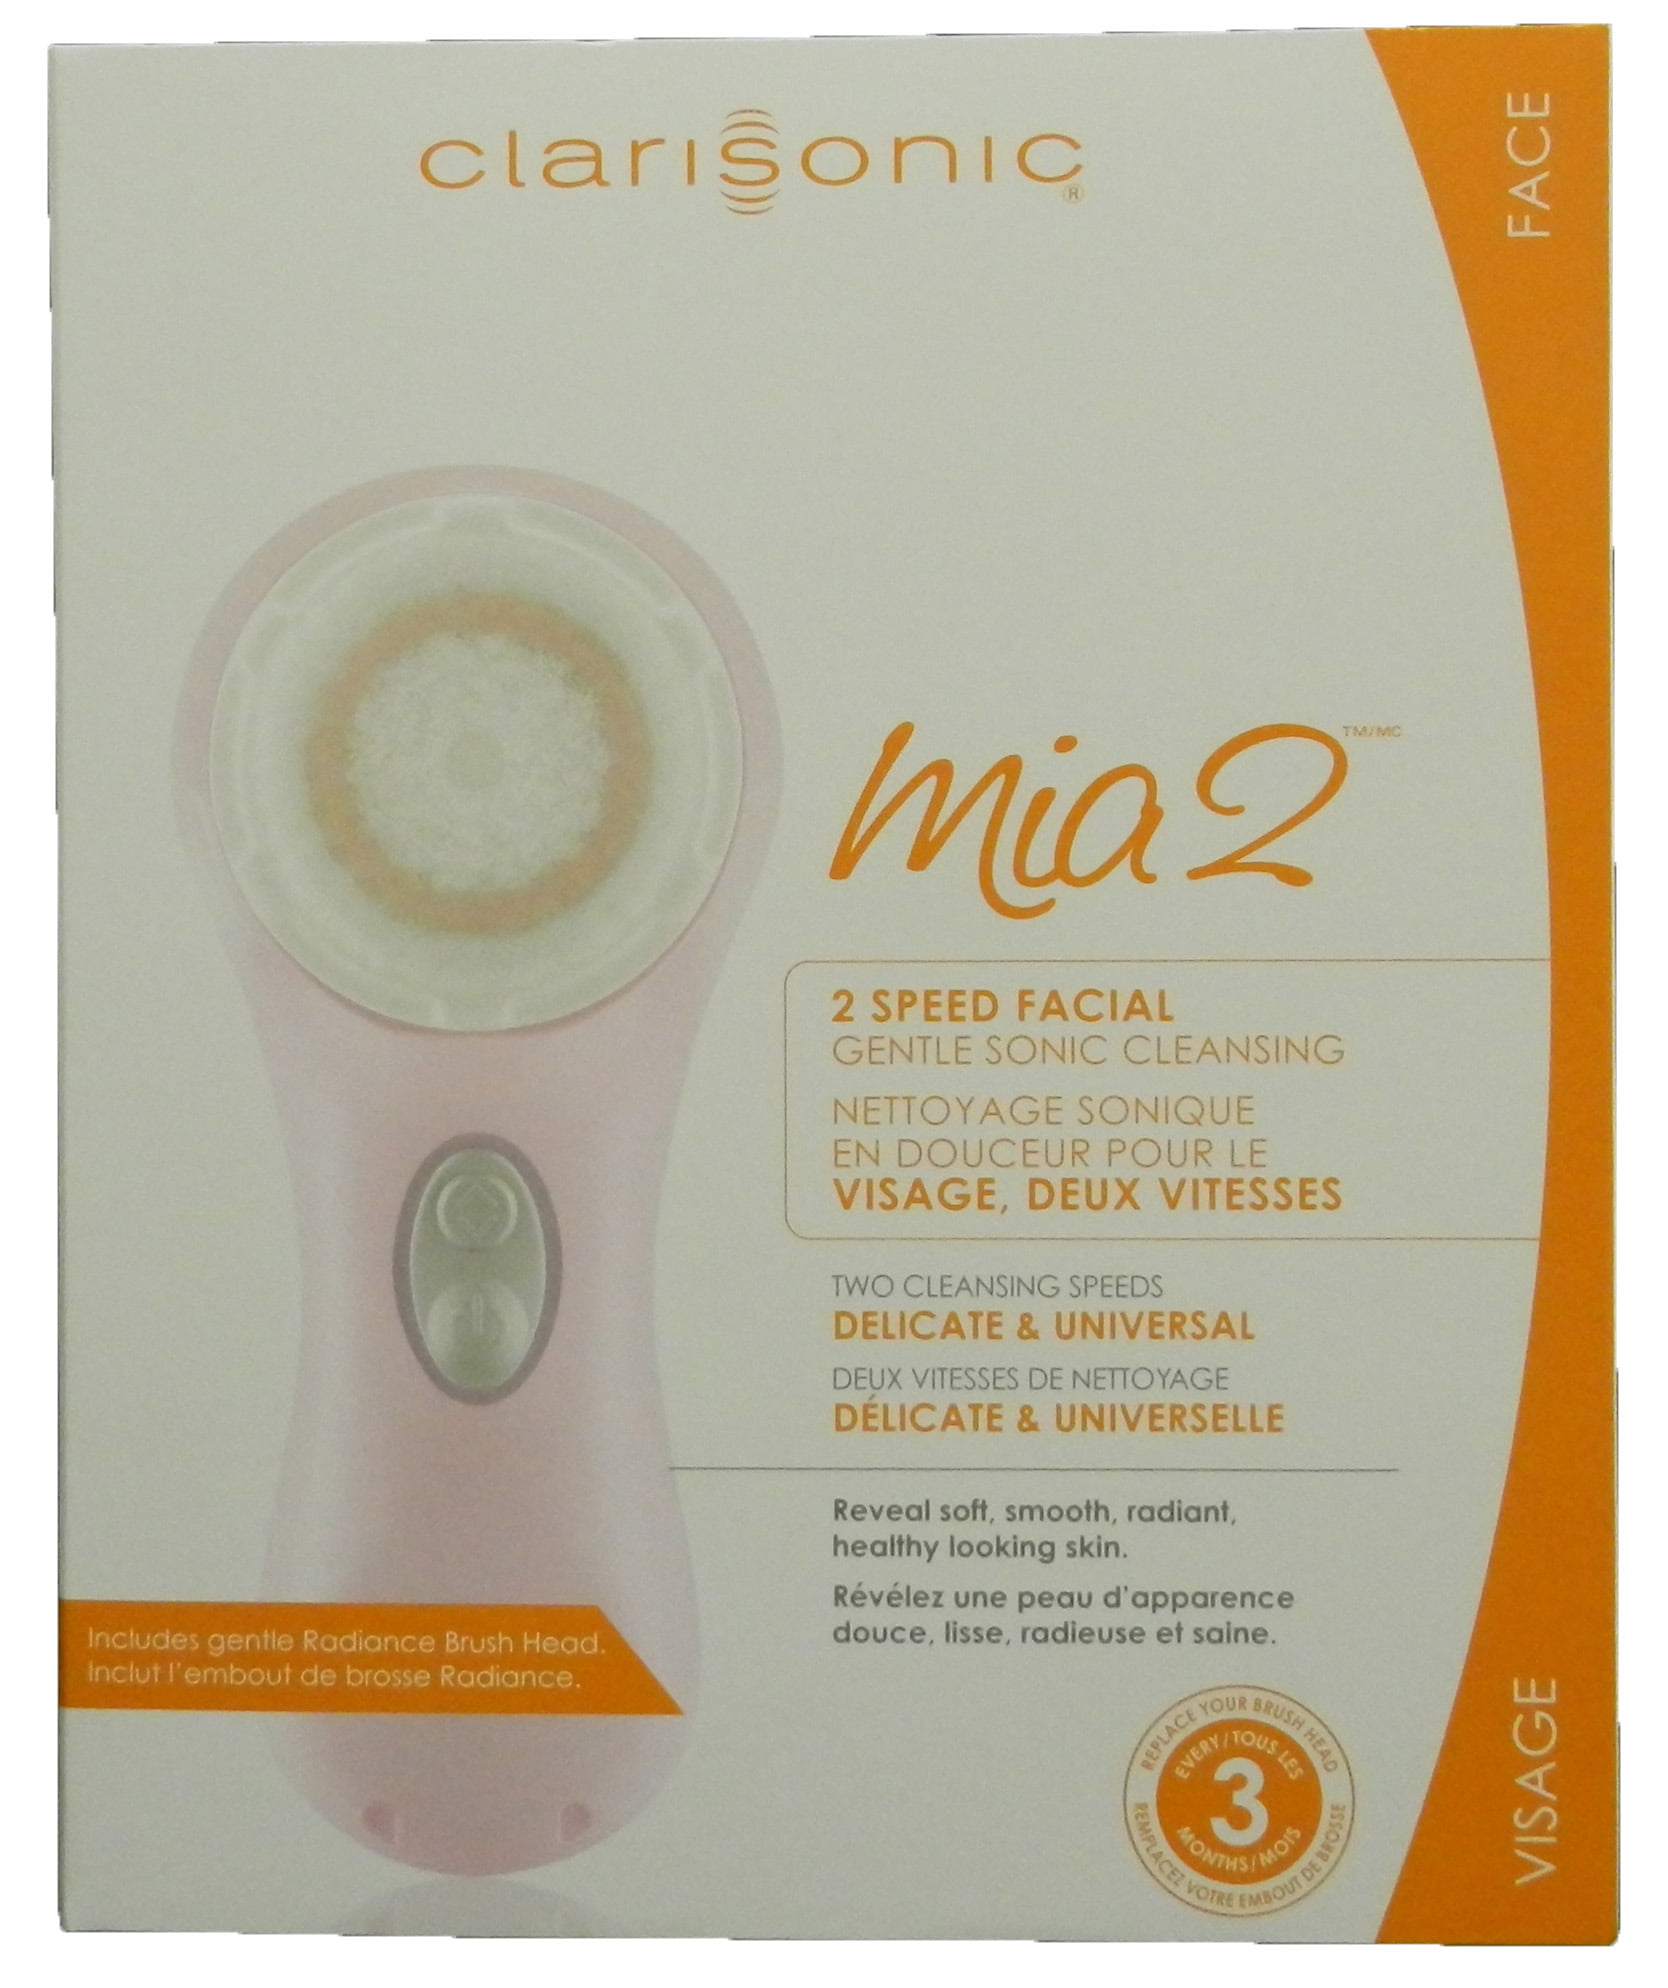 Favorite Skin Care Products - Clarisonic Mia 2 Sonic Skin Cleansing System